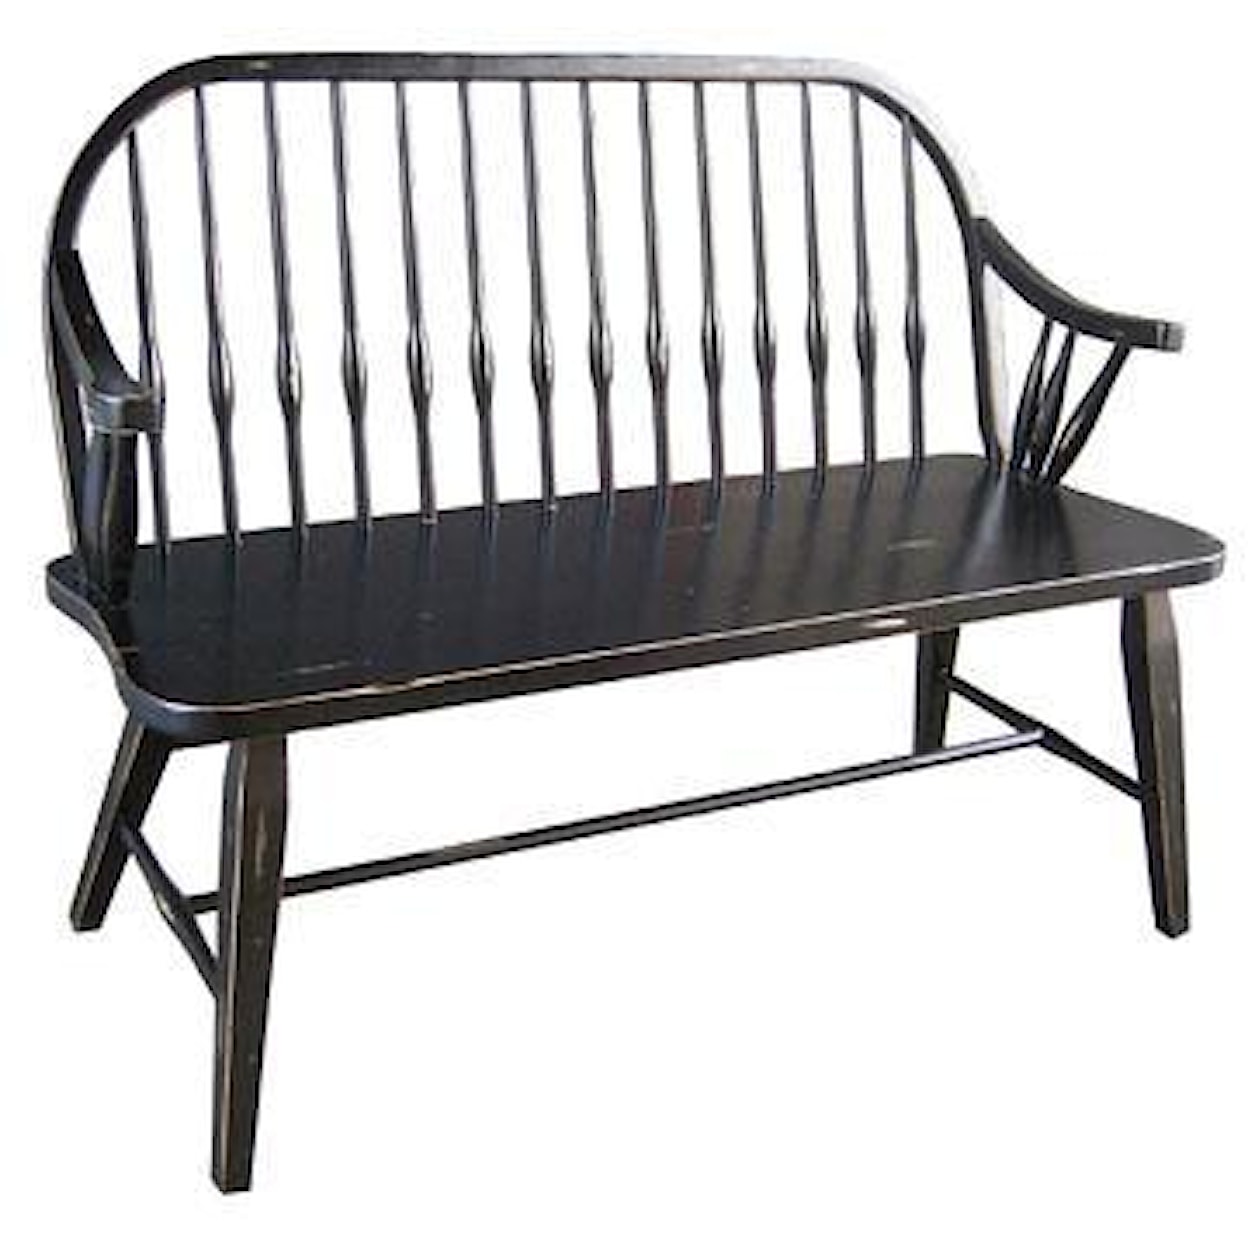 Tennessee Enterprises Benches Deacons Bench